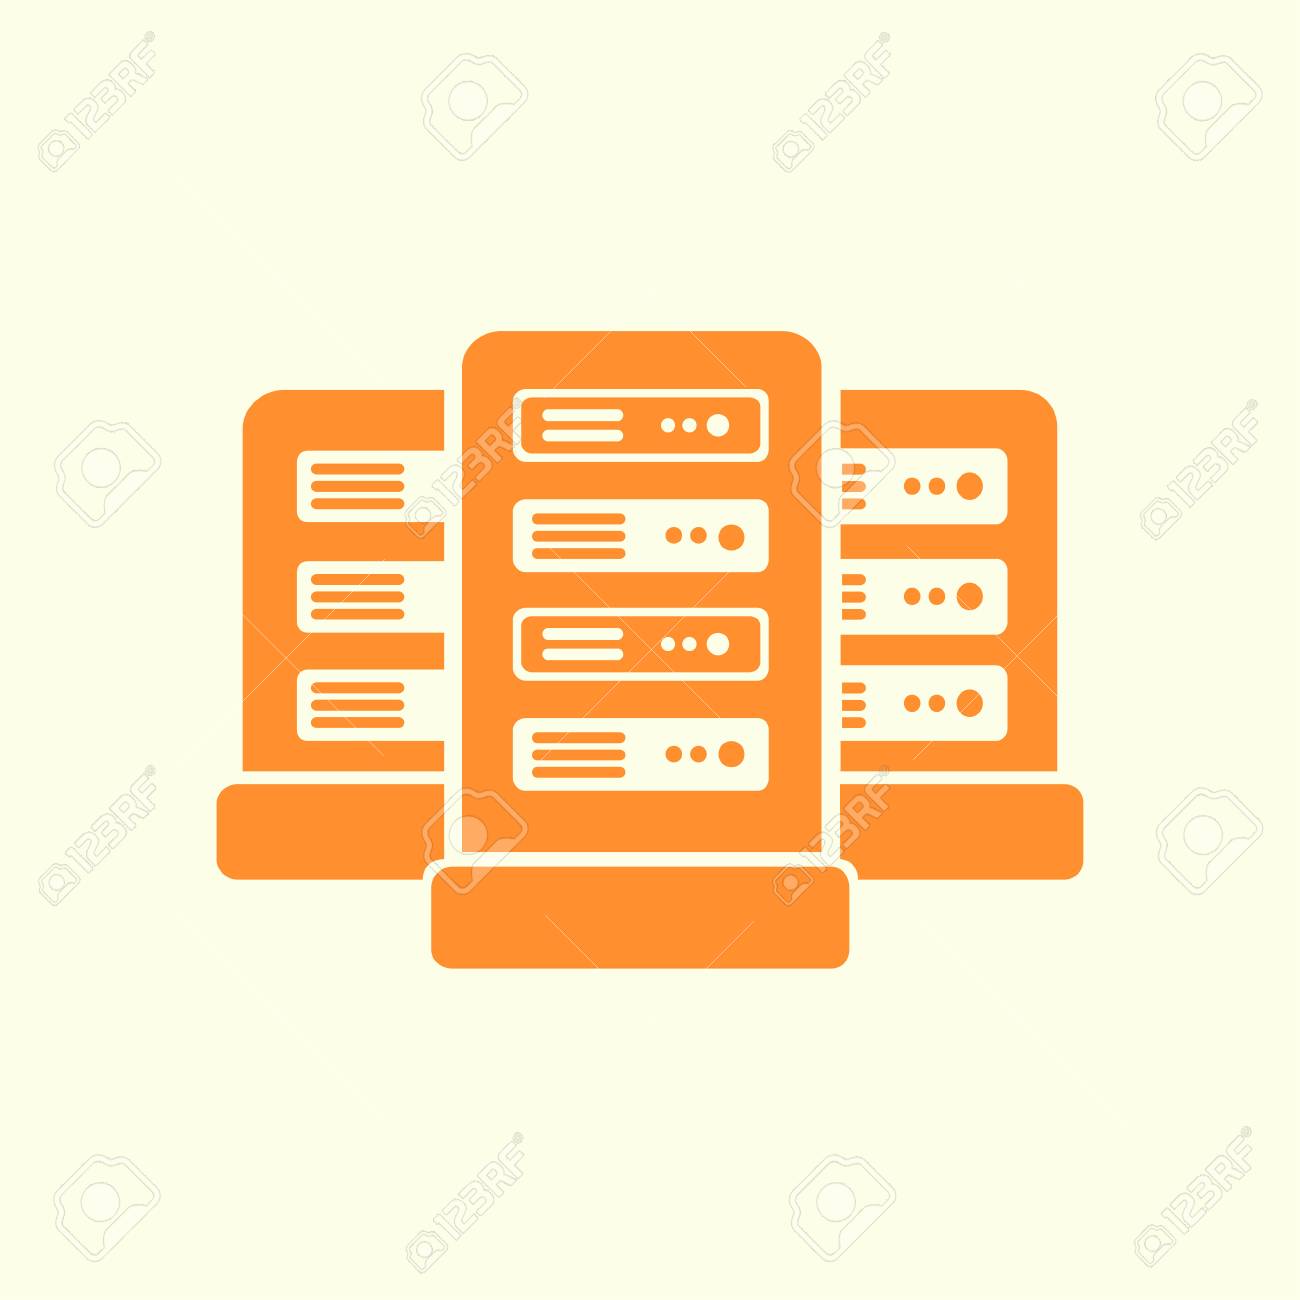 Network servers in data center icon. Flat design style.